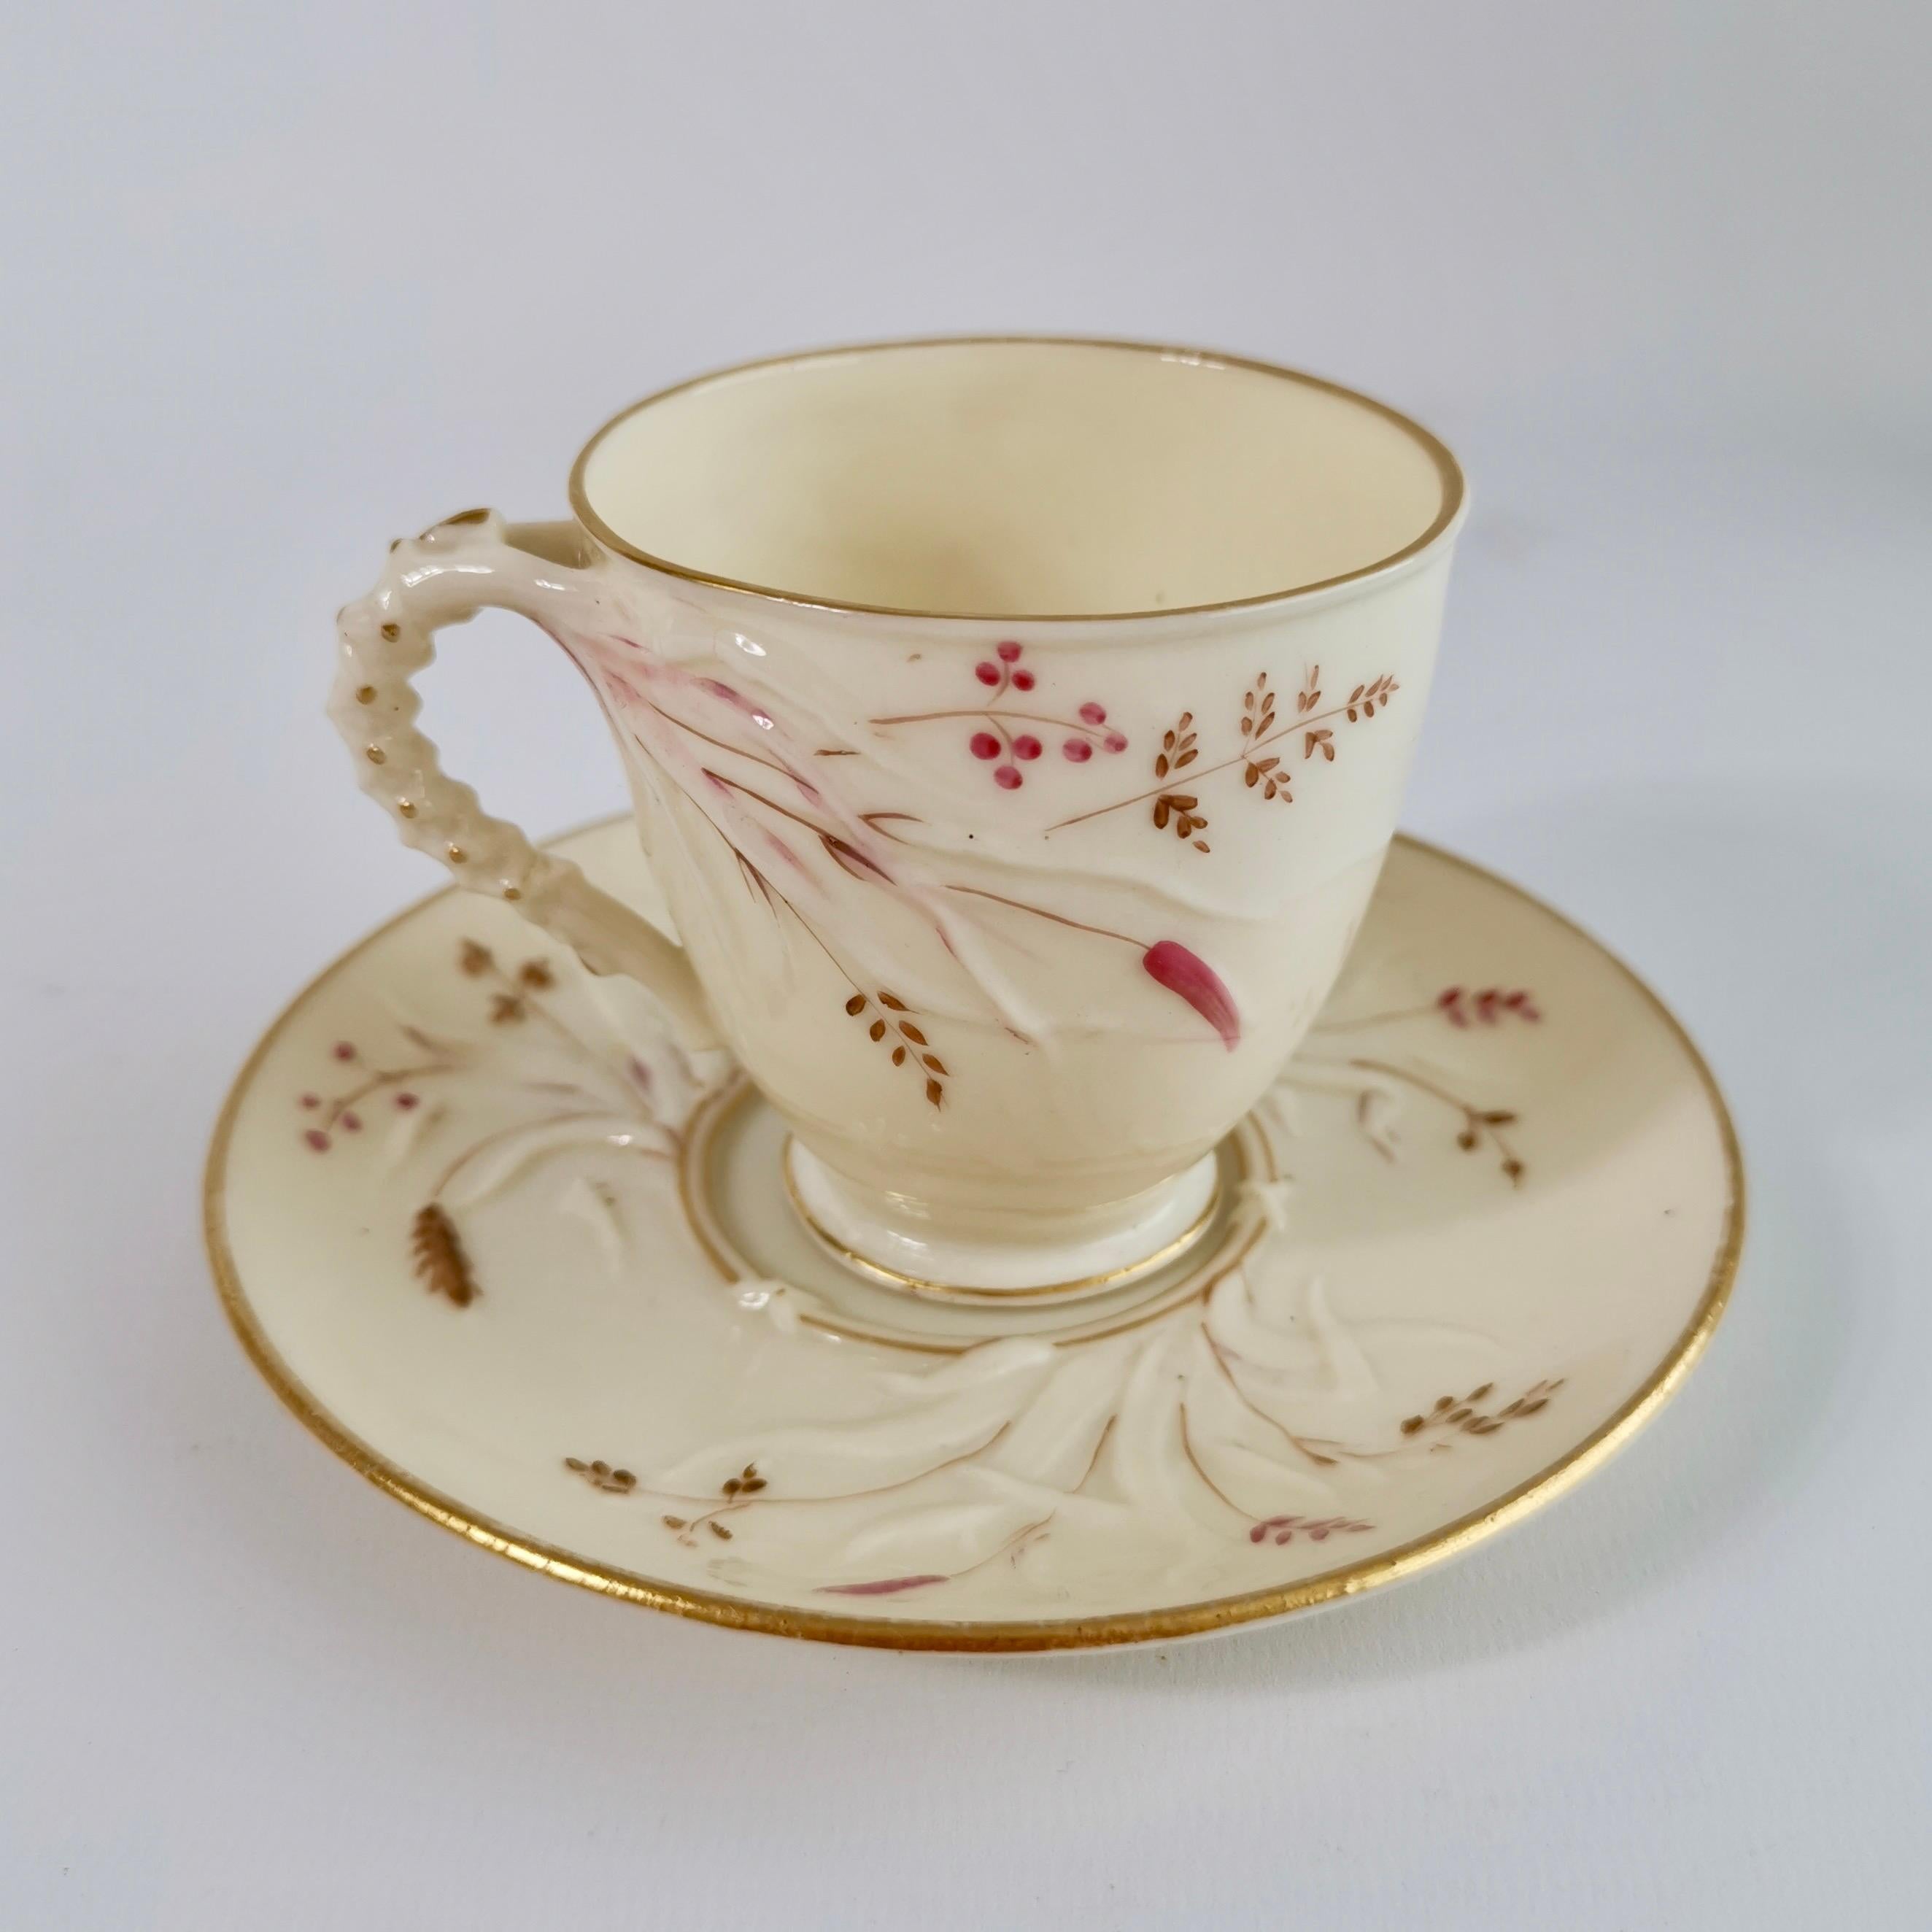 Arts and Crafts Belleek Porcelain Cup and Saucer, Grass Pattern, Victorian 1863-1891